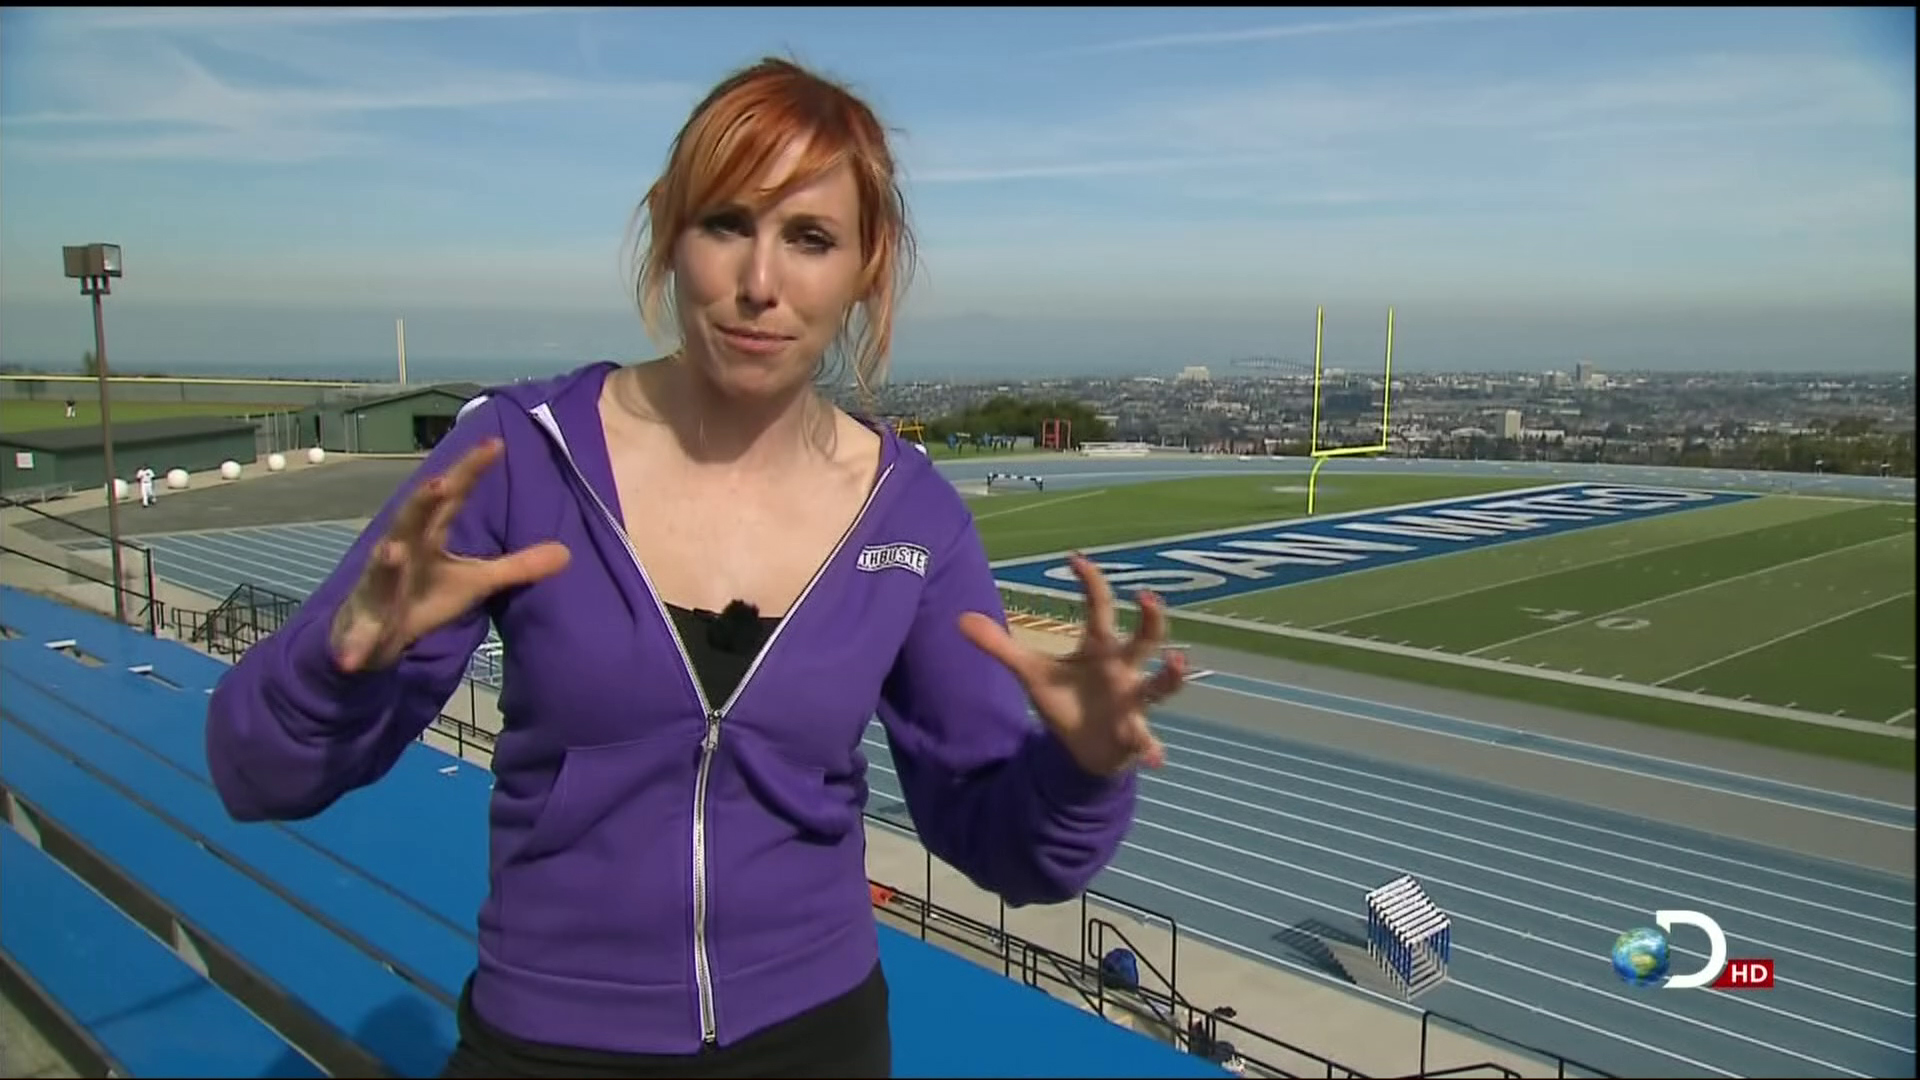 Sexy pictures of kari byron